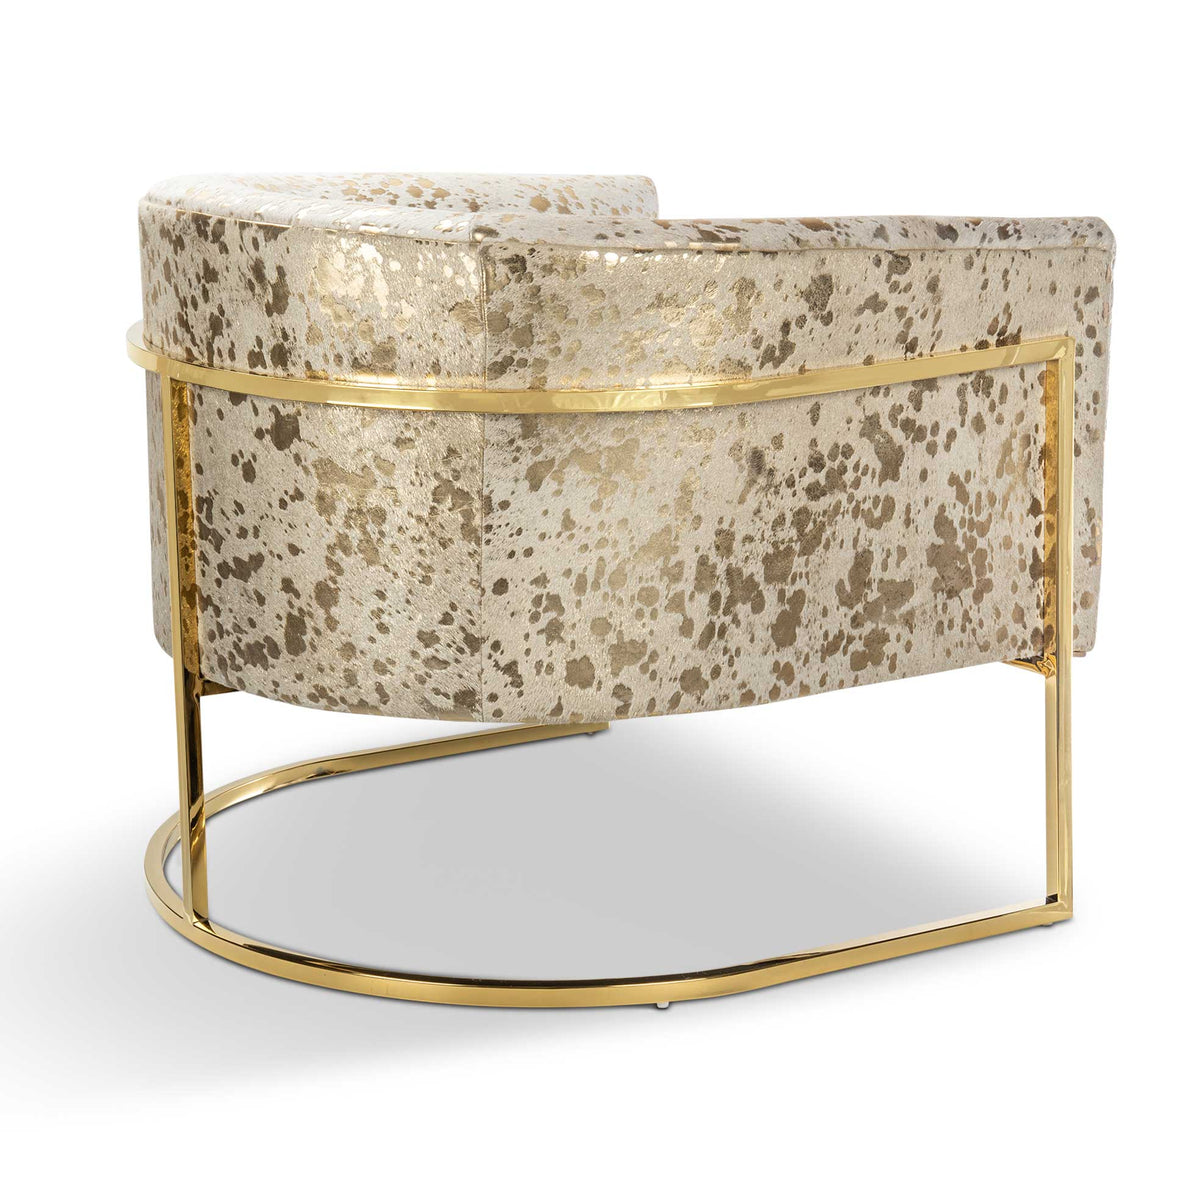 Lisbon Chair in Gold Speckled Cowhide